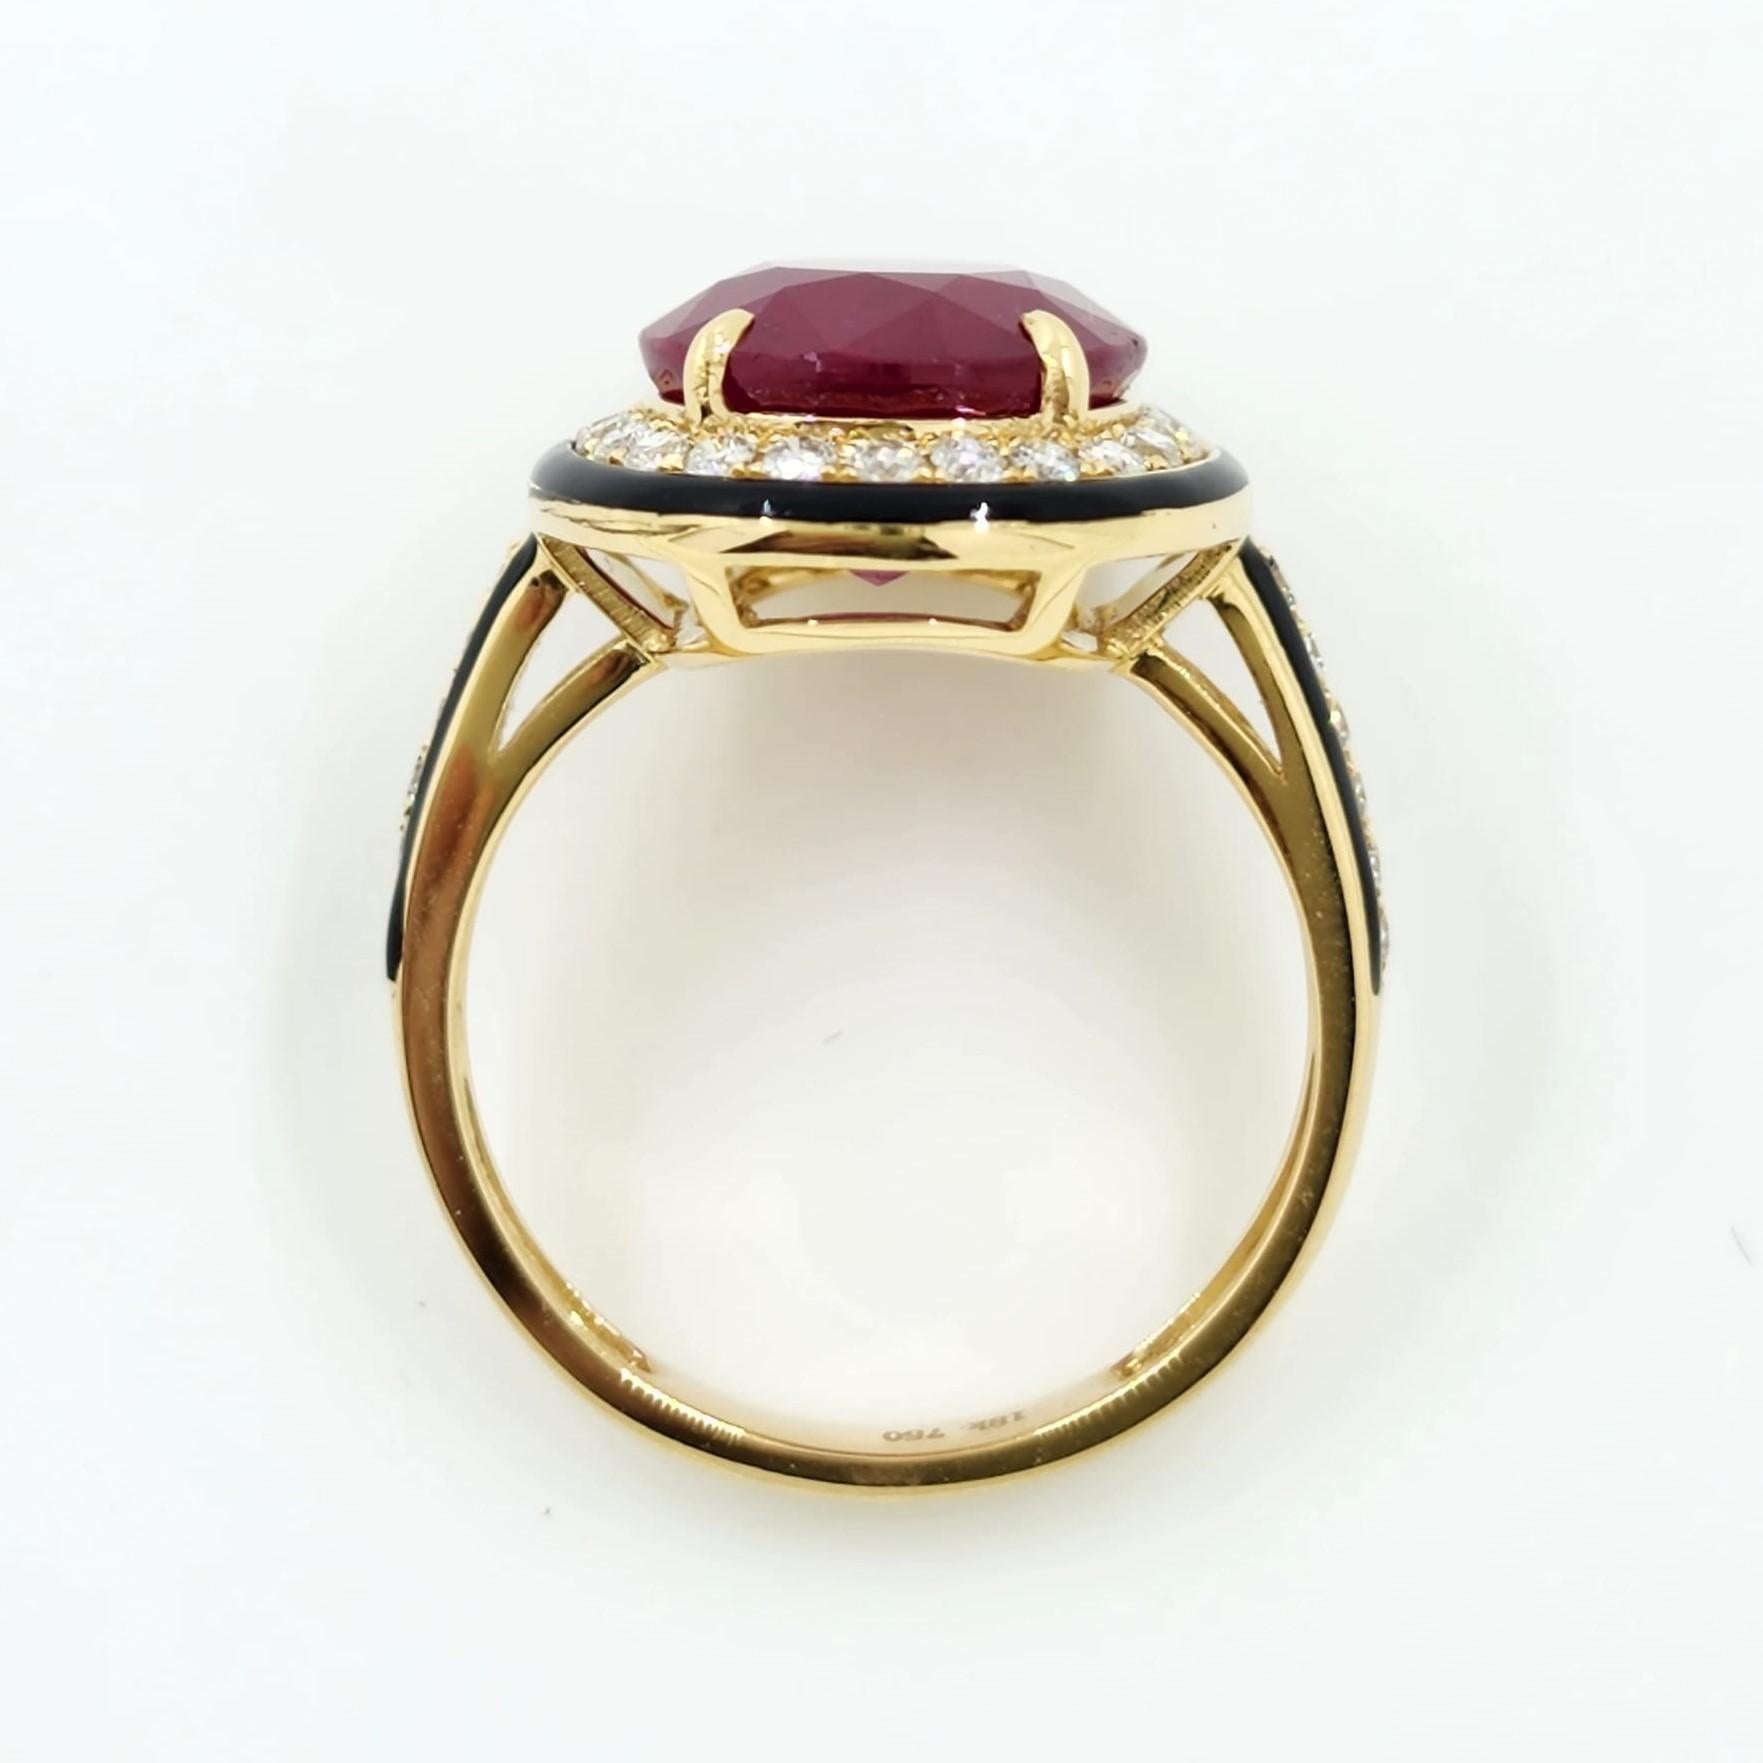 Contemporary 6.58 Carat Glass Filled Ruby Diamond Enamel Ring in 18 Karat Yellow Gold For Sale